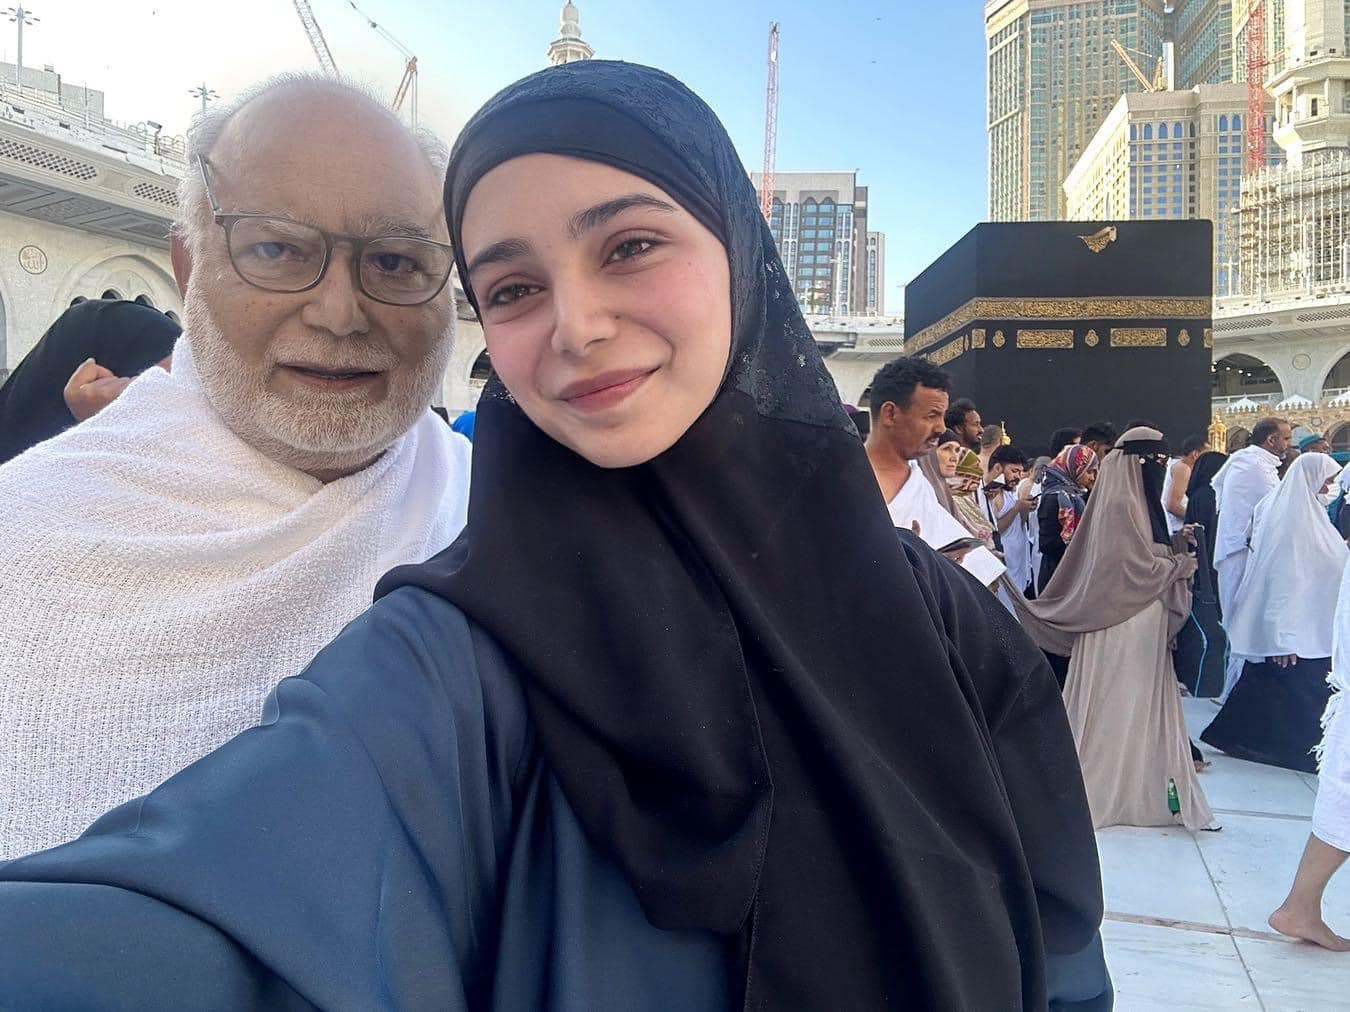 Popular Singer Aima Baig performed Umrah with her Father